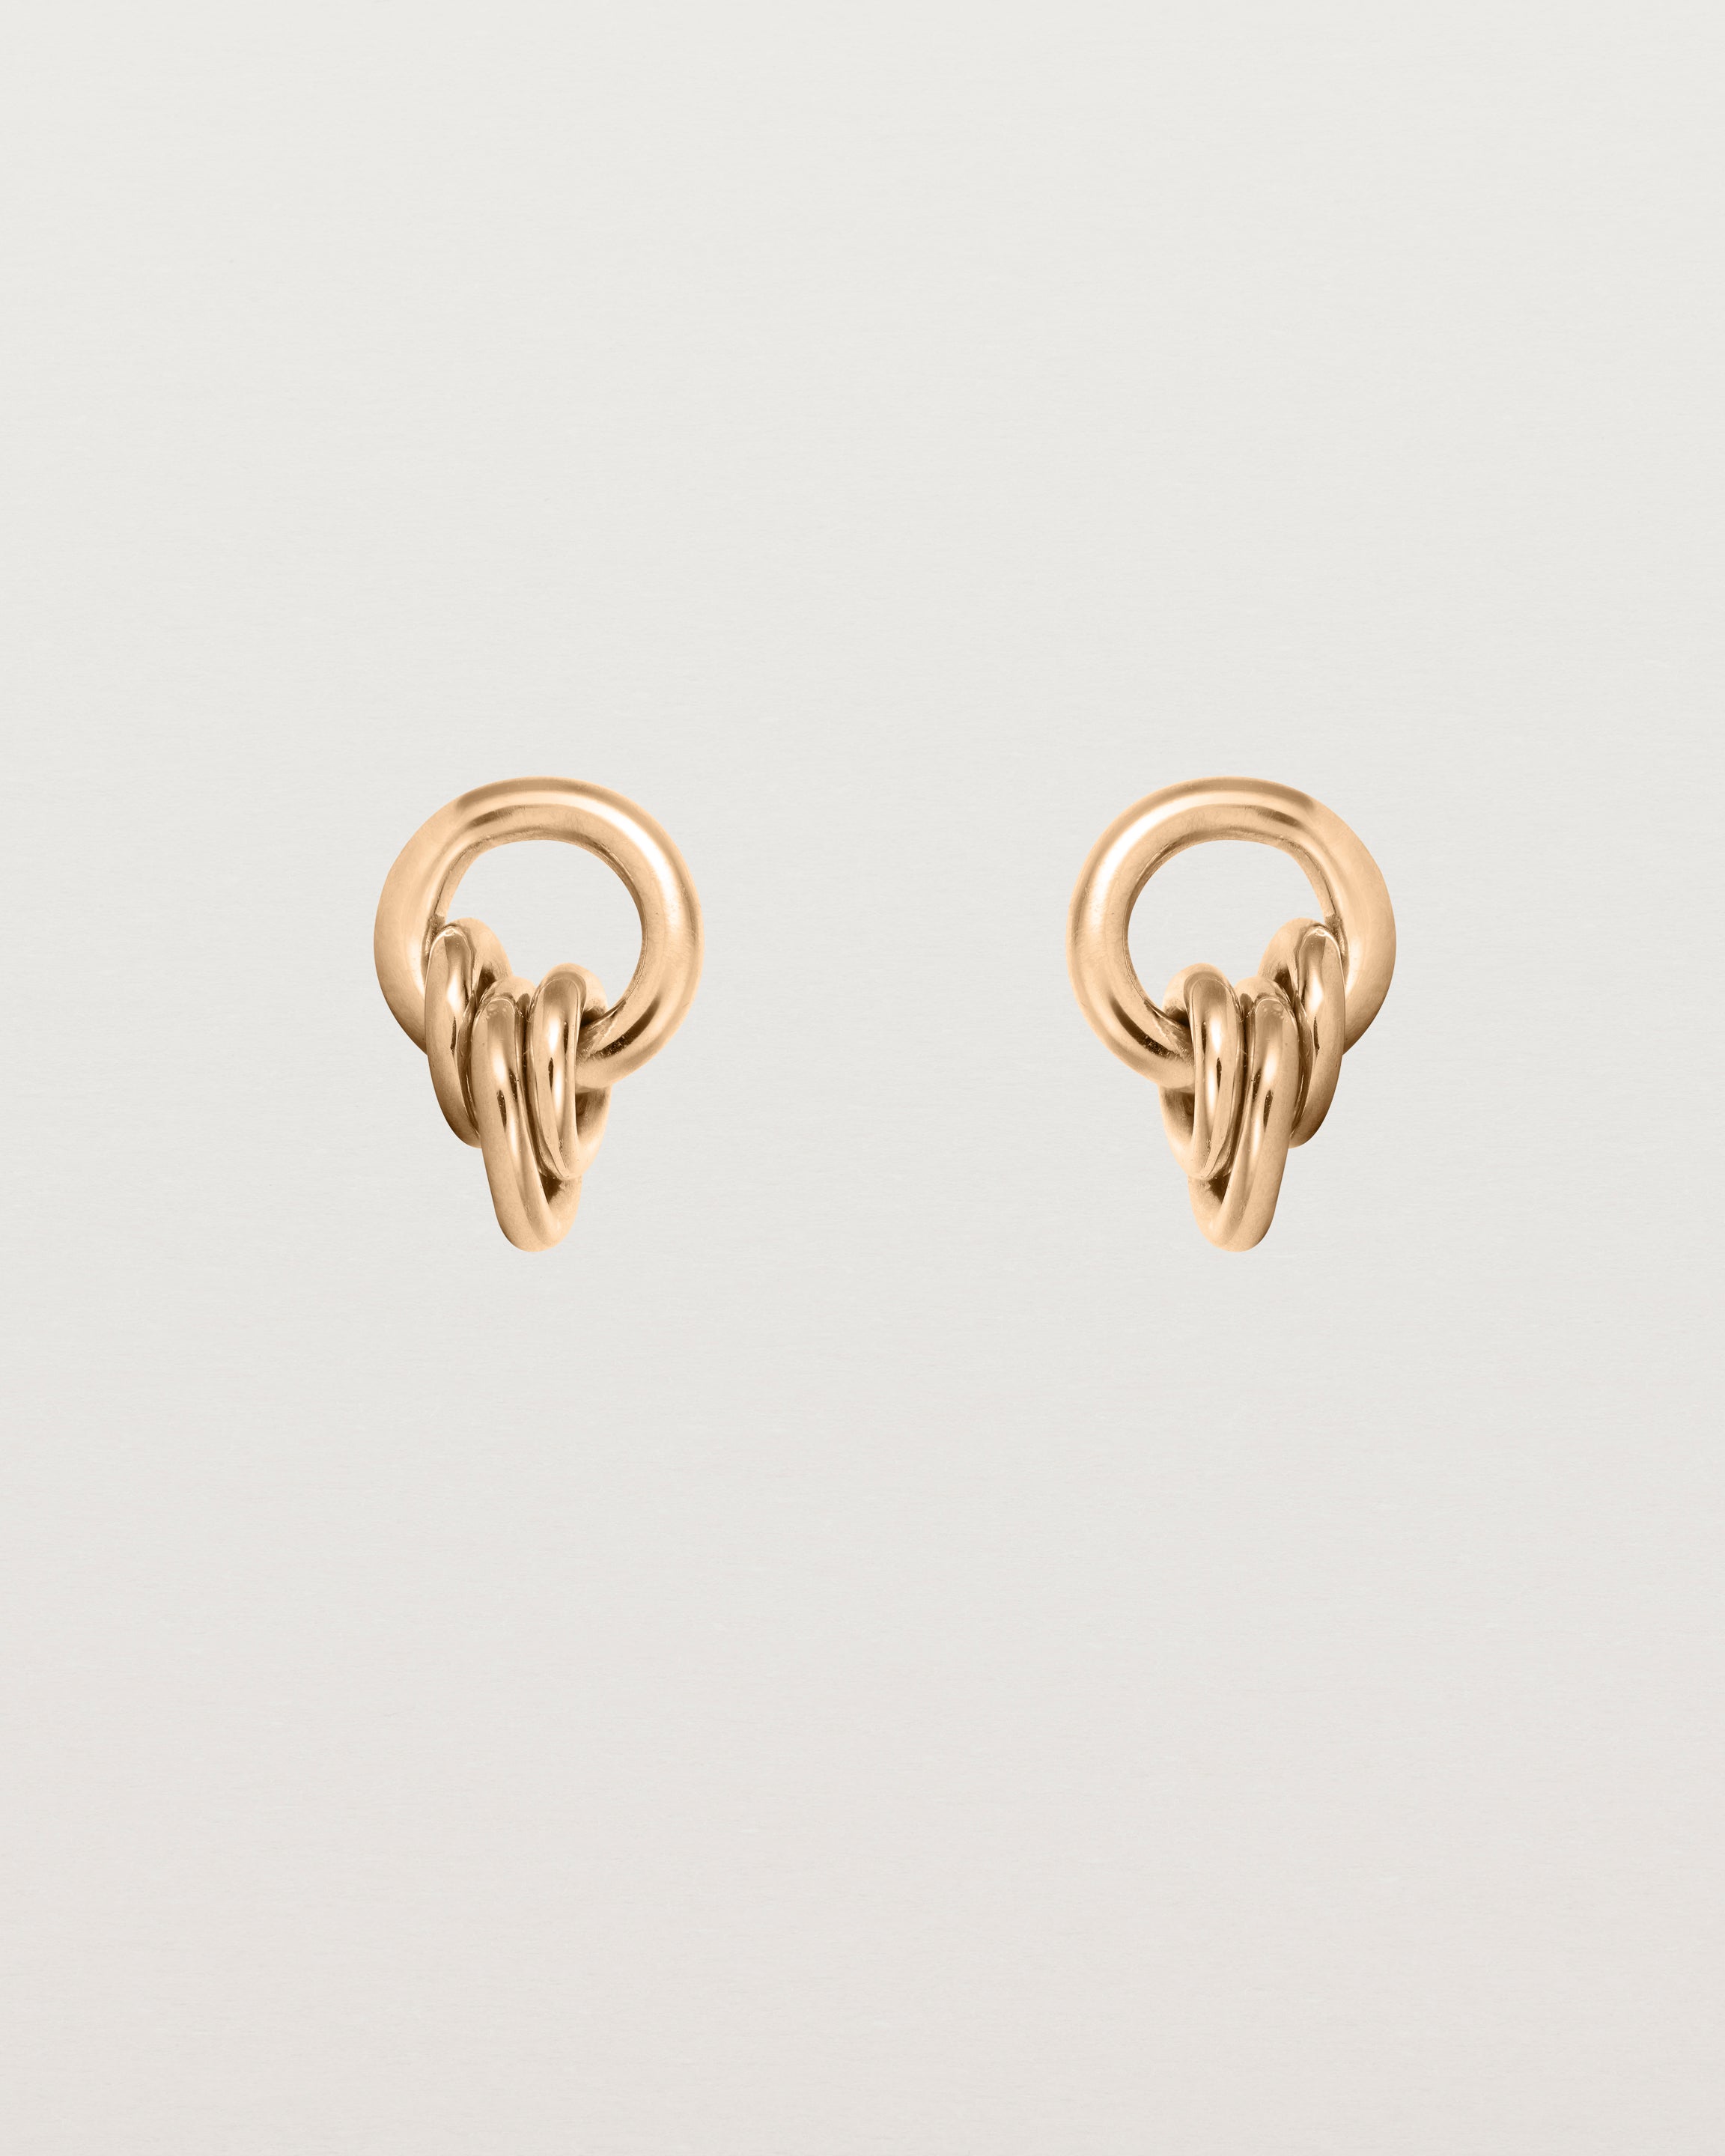 A pair of rose gold studs with three mini hoops attached